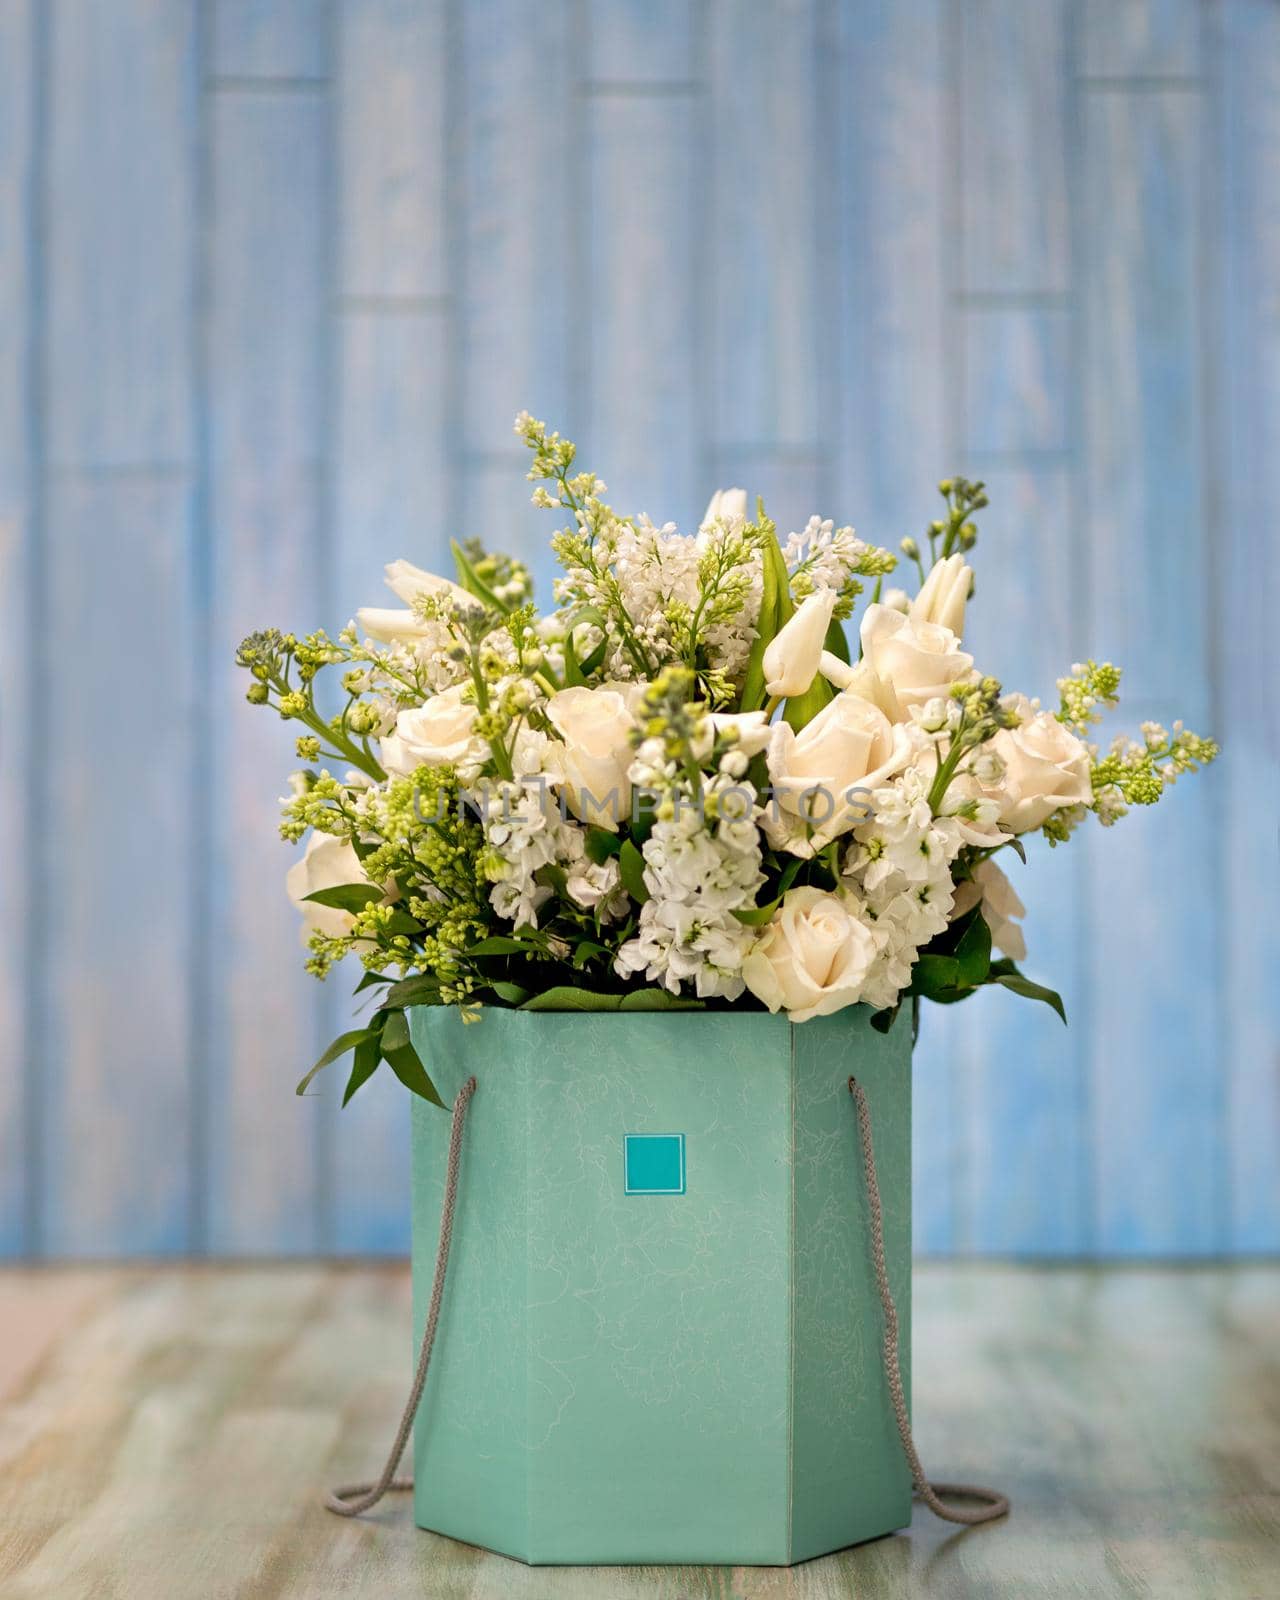 Beautiful white flower bouquet in the box